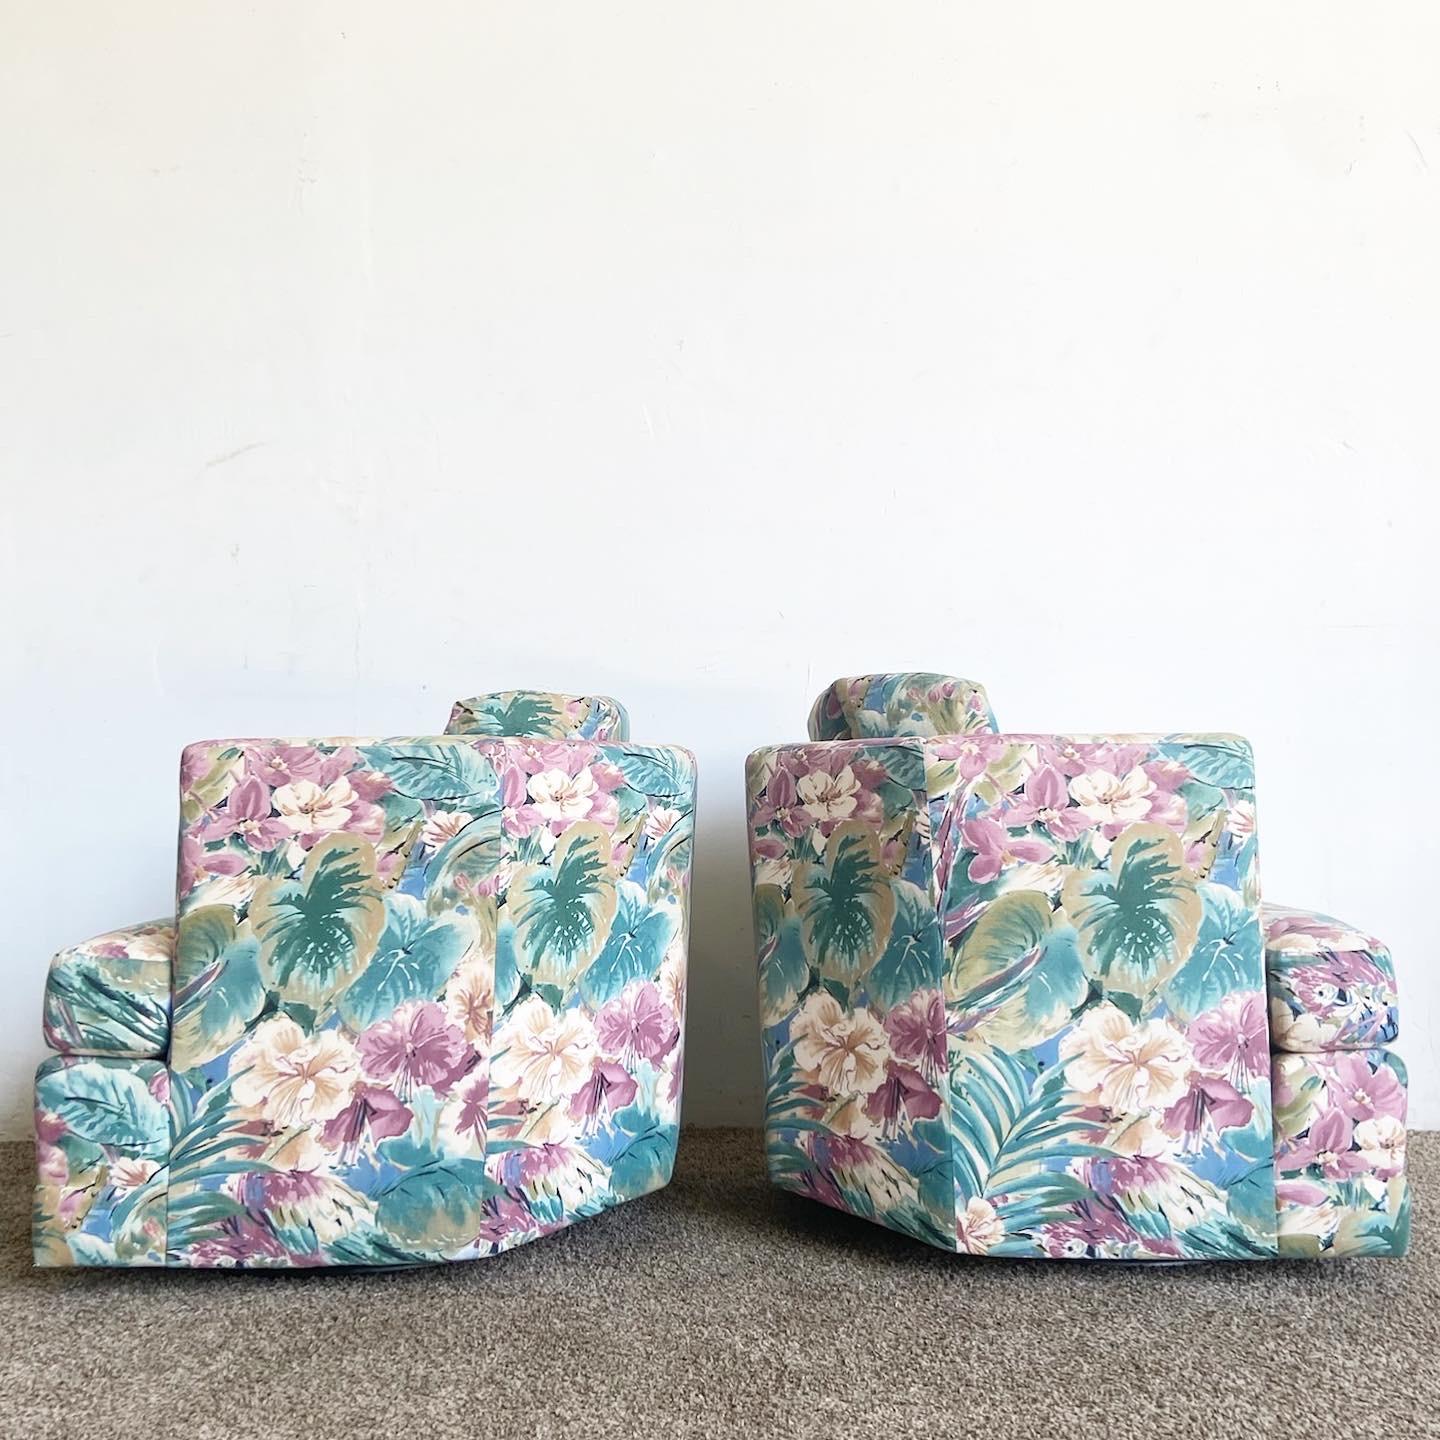 Immerse yourself in the vibrant design of our wonderful pair of vintage postmodern swivel chairs. These chairs feature geometric backrests and captivating upholstery with parrot and foliage fabric, adding artistic flair to any space while providing